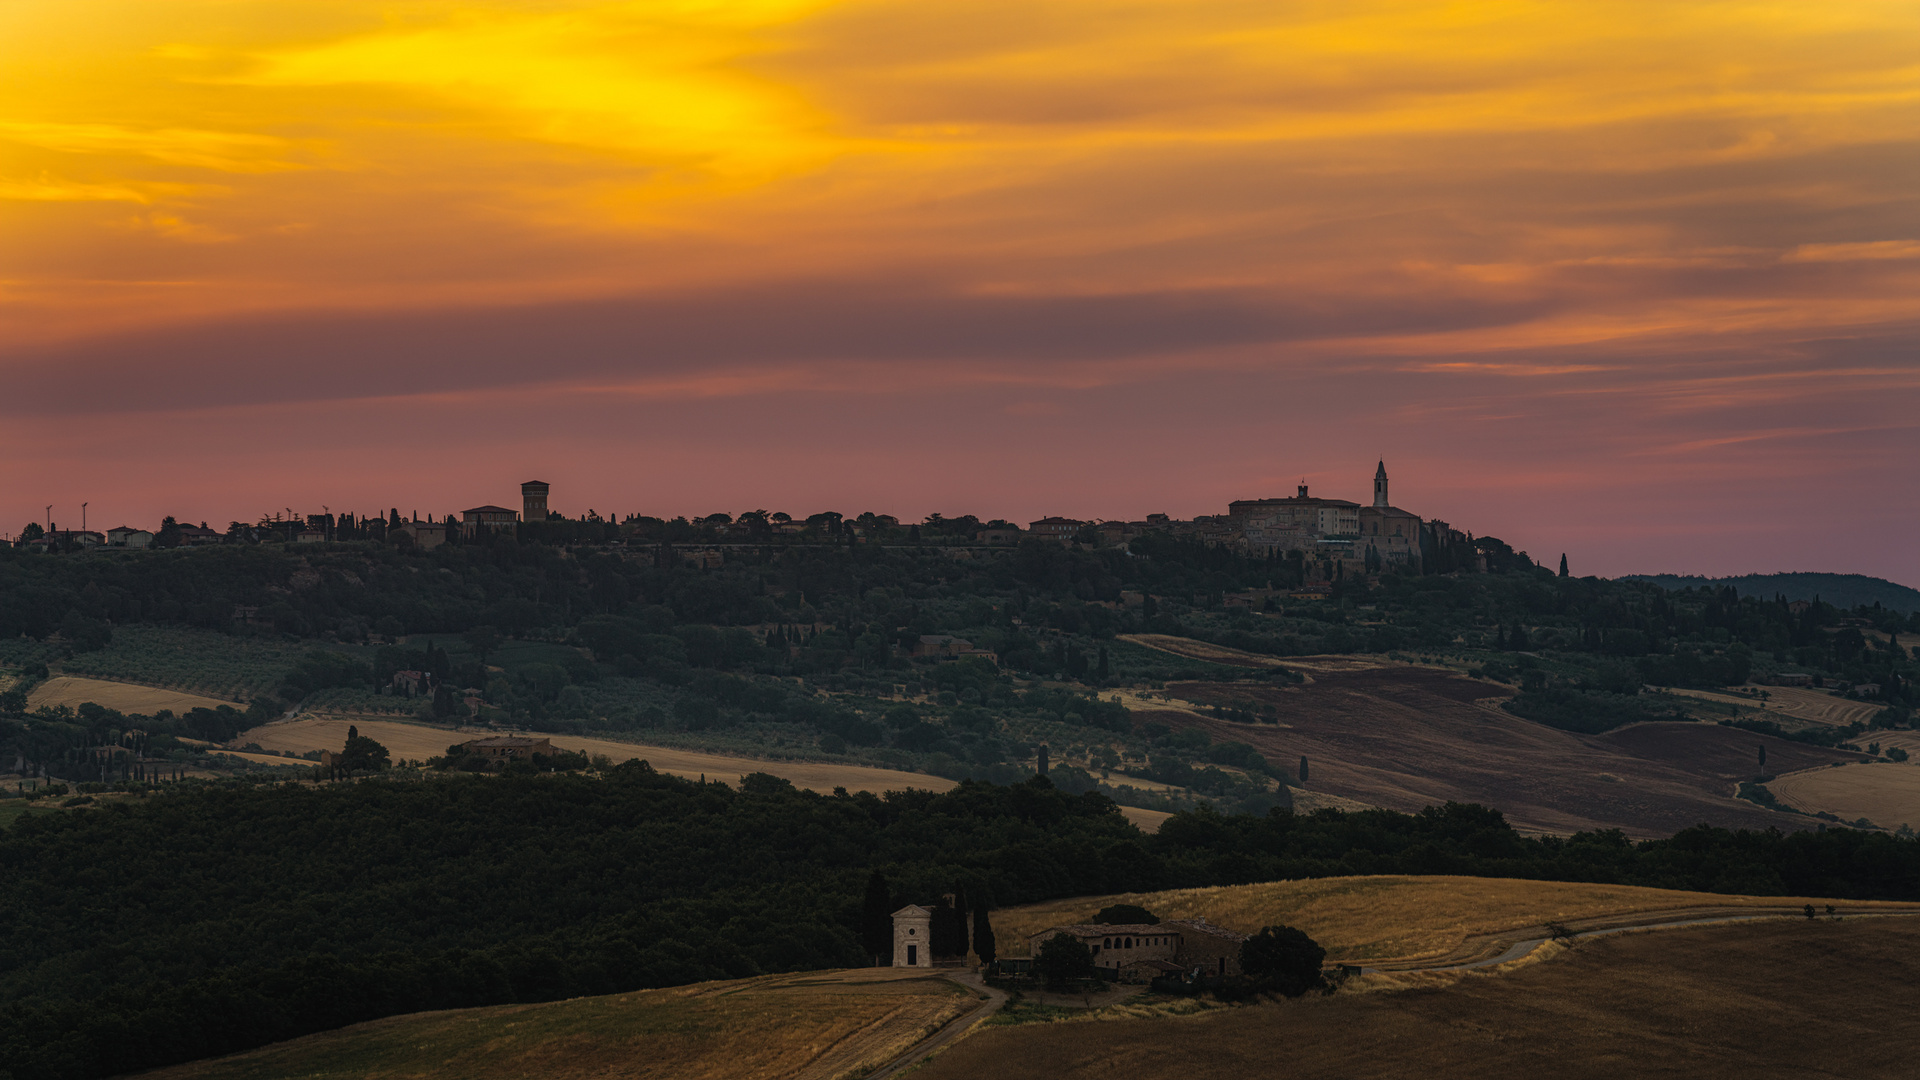 SUNRISE IN VAL D'ORCIA